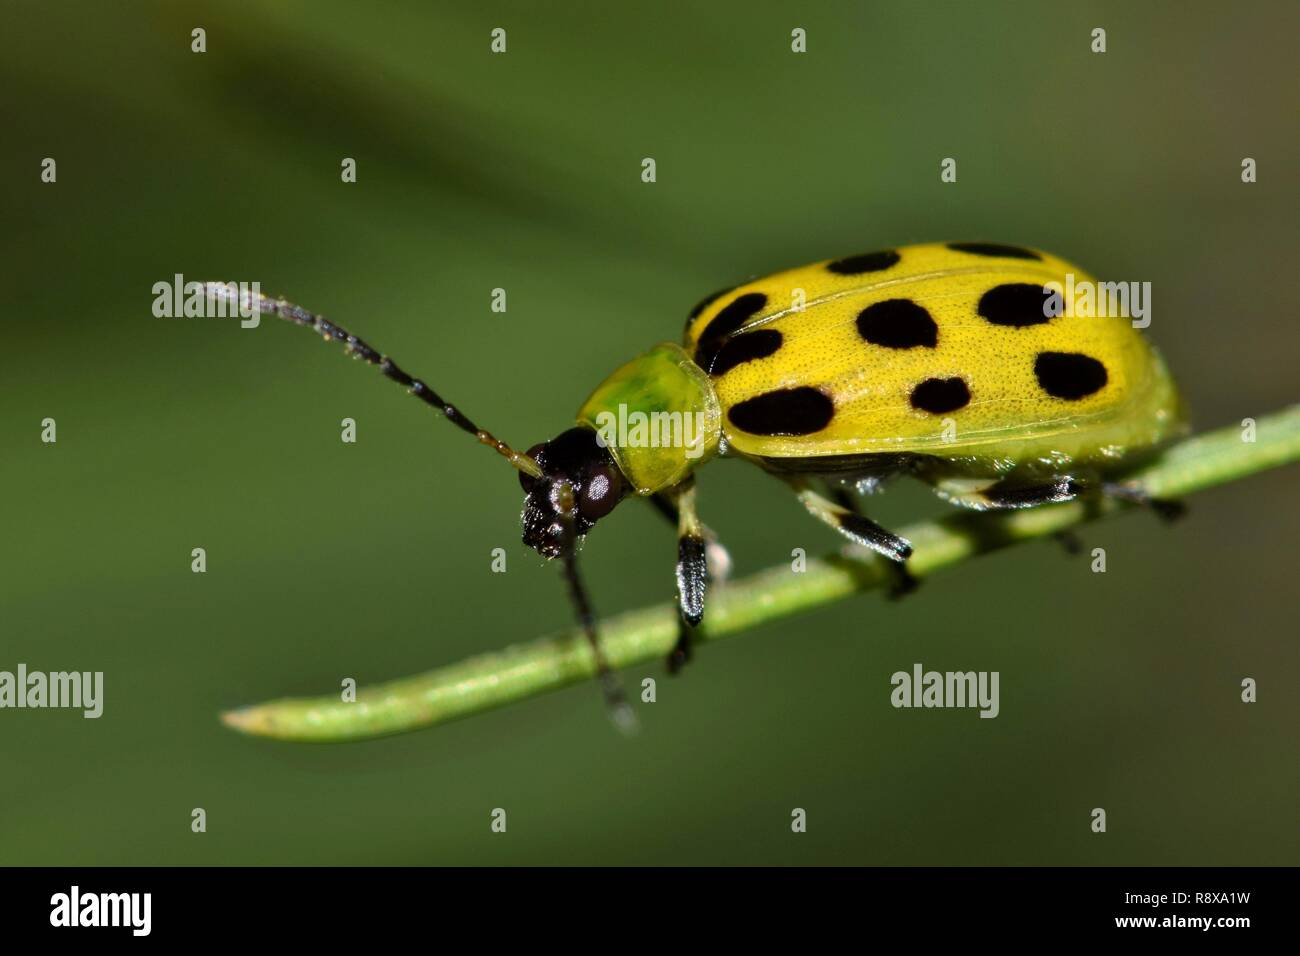 Gå tilbage straf jordskælv A Spotted Cucumber Beetle (Diabrotica undecimpunctata) makes its way along  a pine needle. These beetles are considered pests in many parts of the US  Stock Photo - Alamy